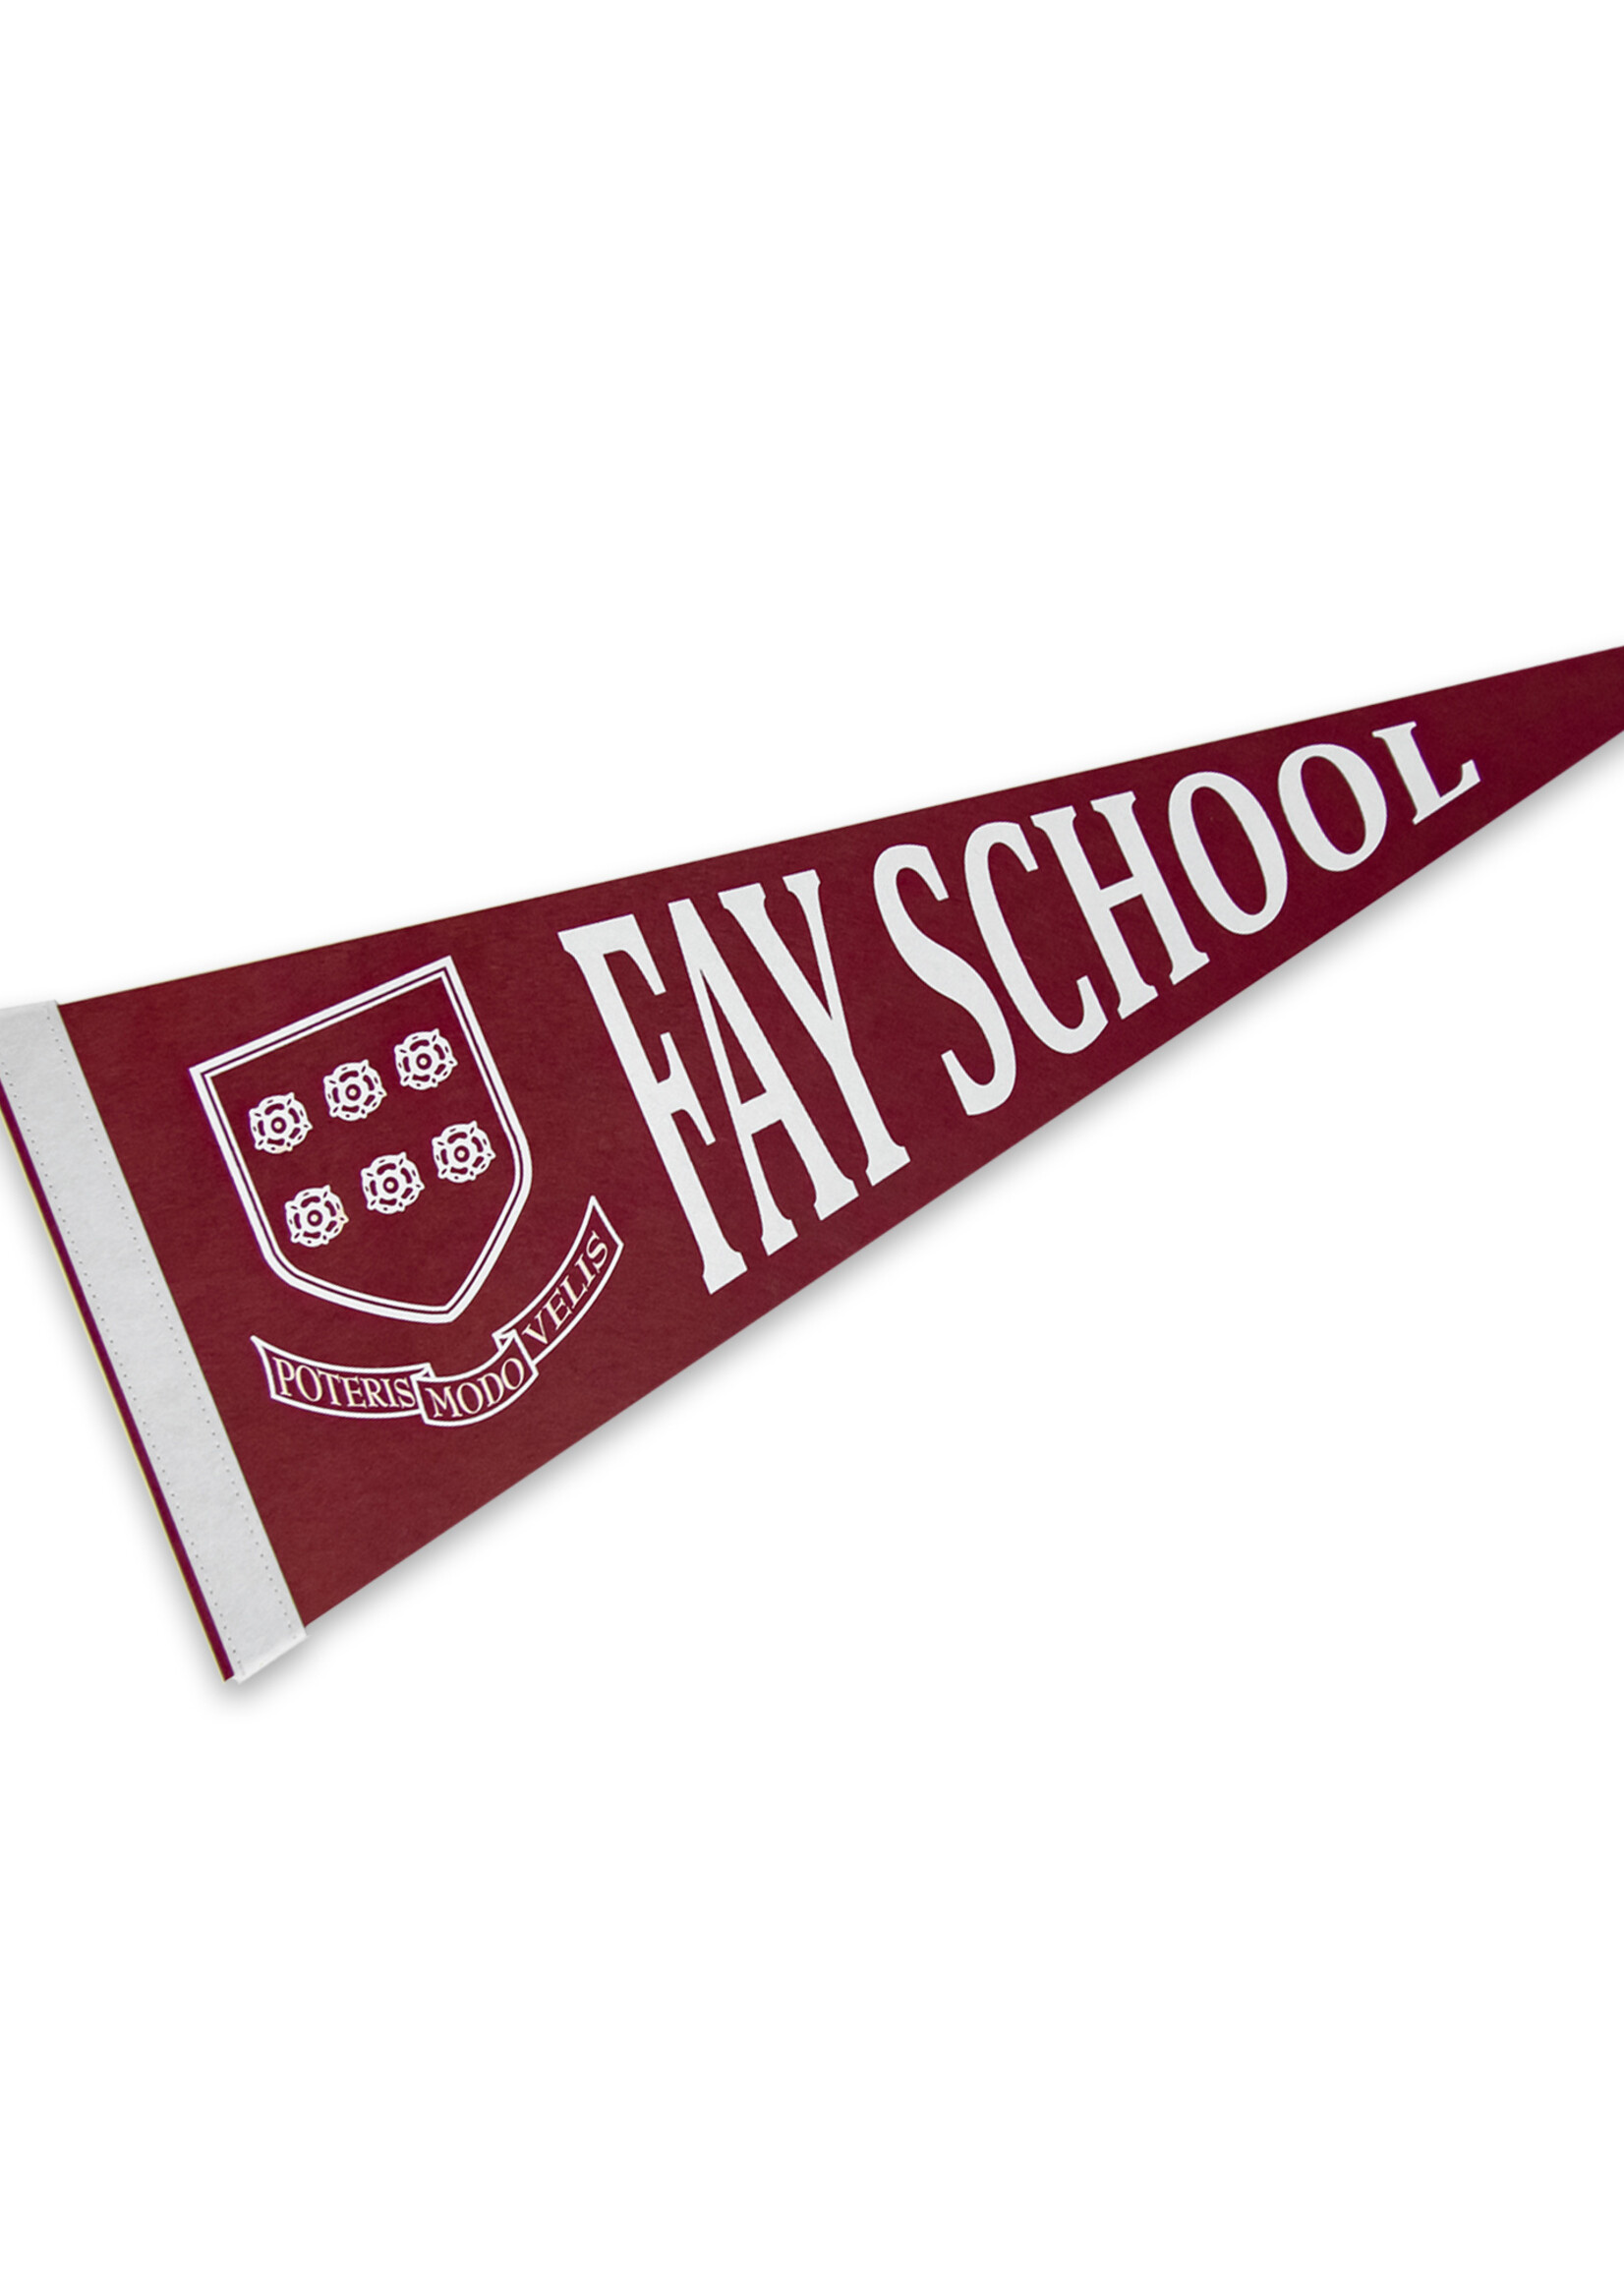 Collegiate Pacific Pennant 9”x24” Cardinal Red